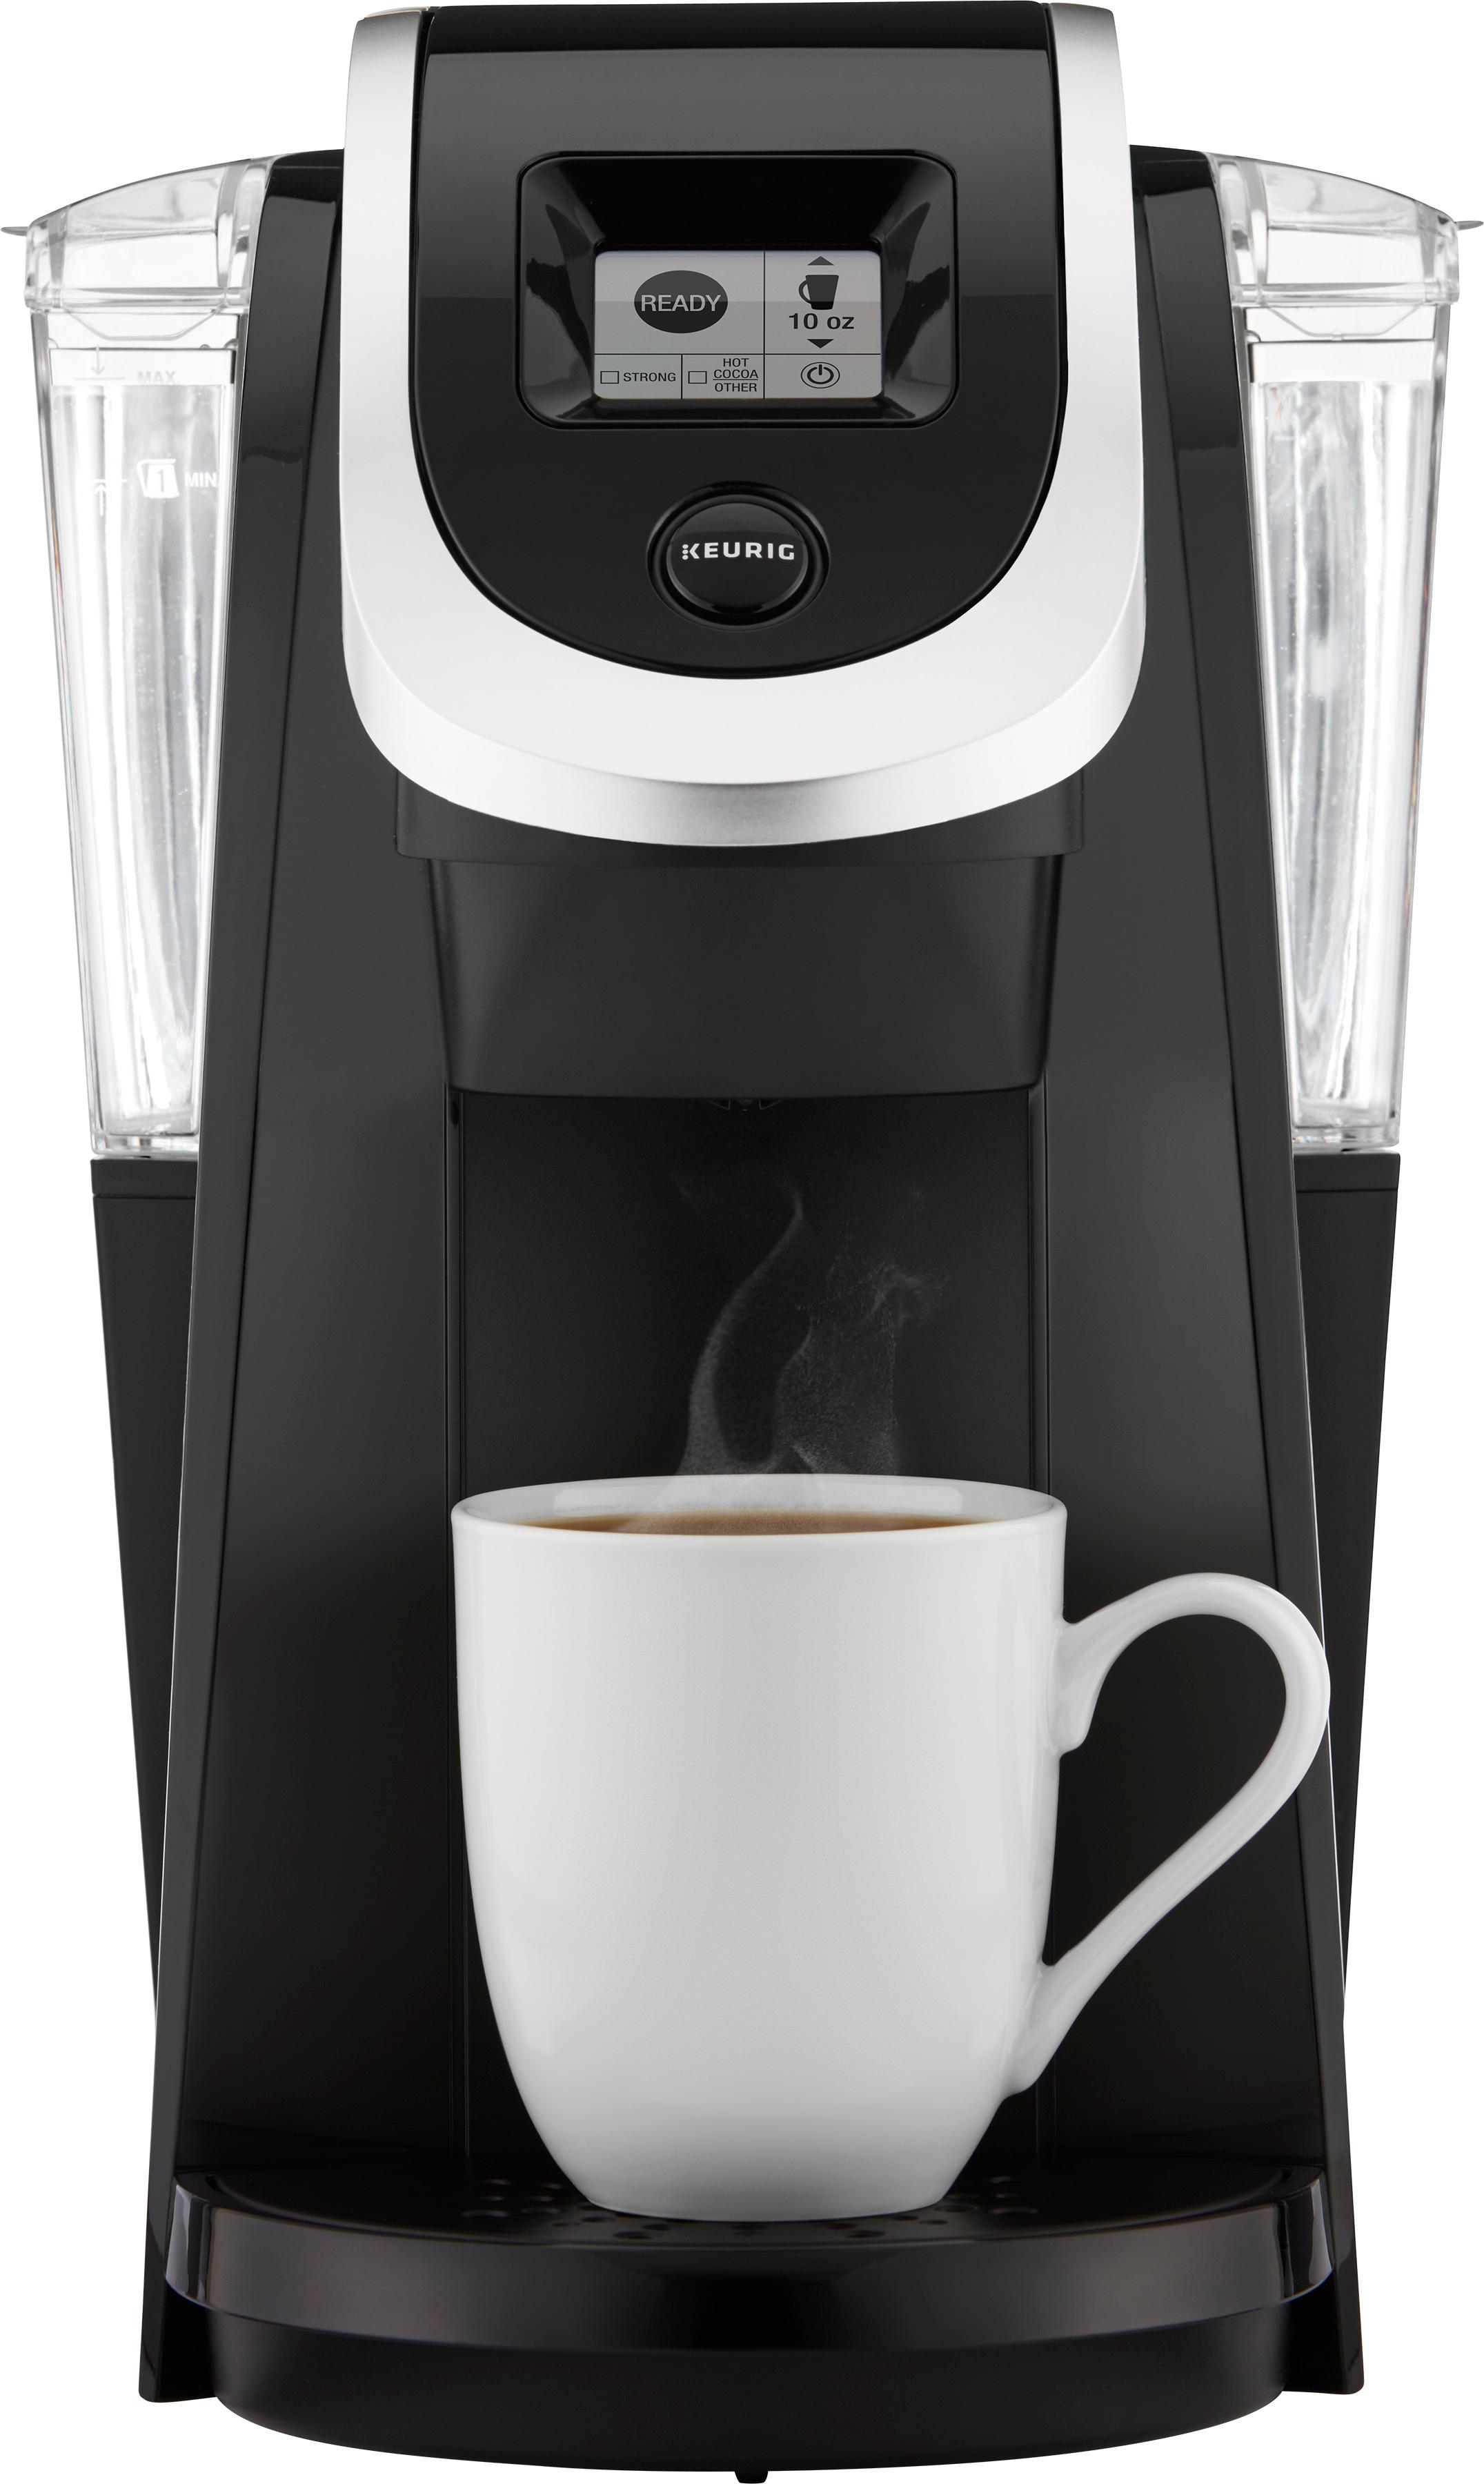 Keurig® K-1500 Commercial Coffee Maker with 8 Boxes K-Cup® Pods